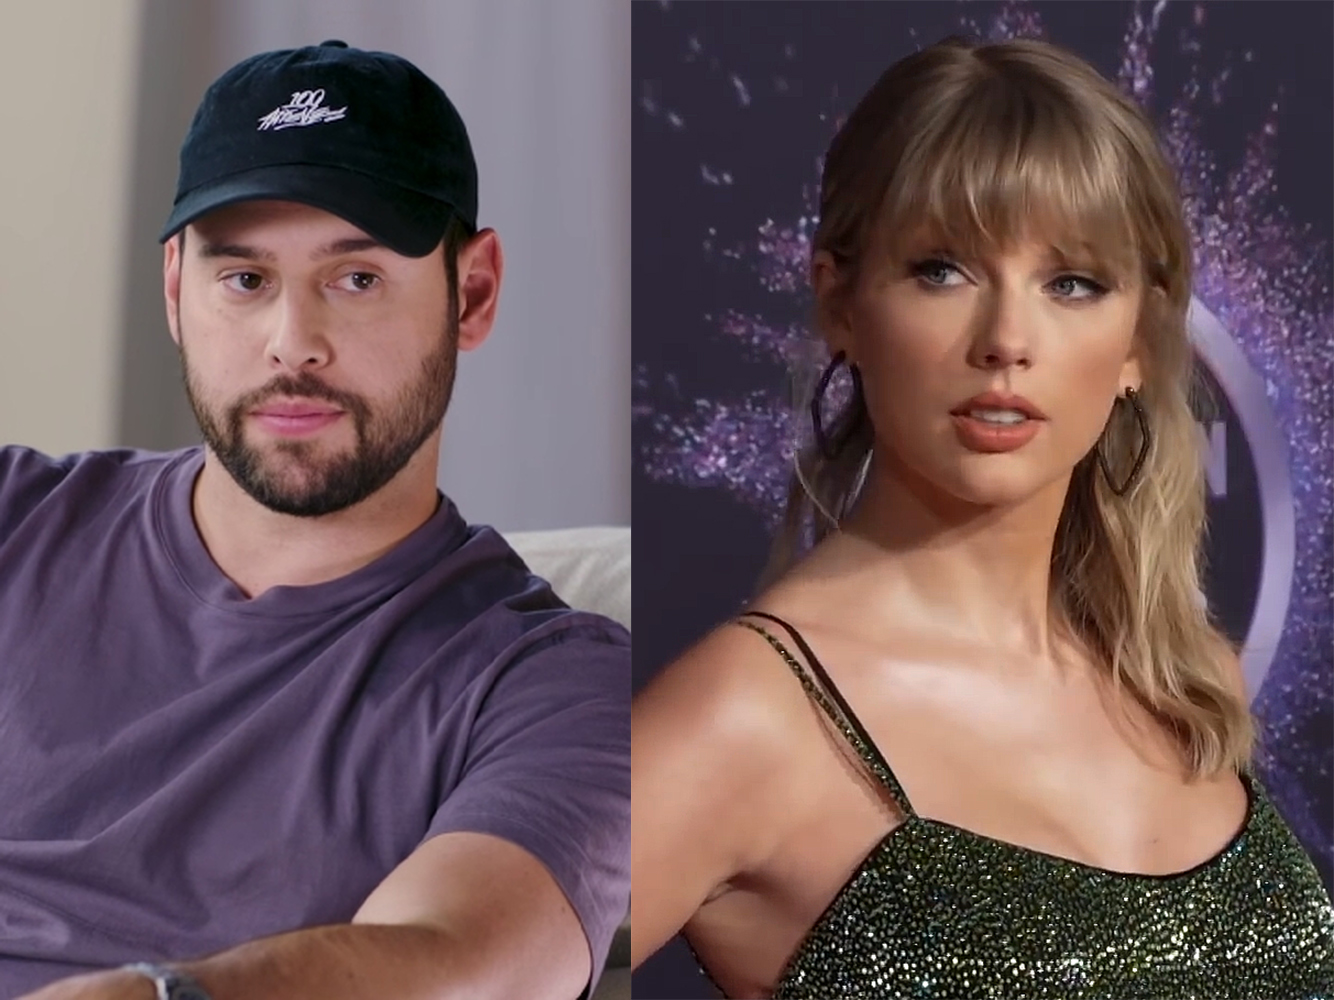 Scooter Braun sells the masters of Taylor Swift’s albums for over $300m